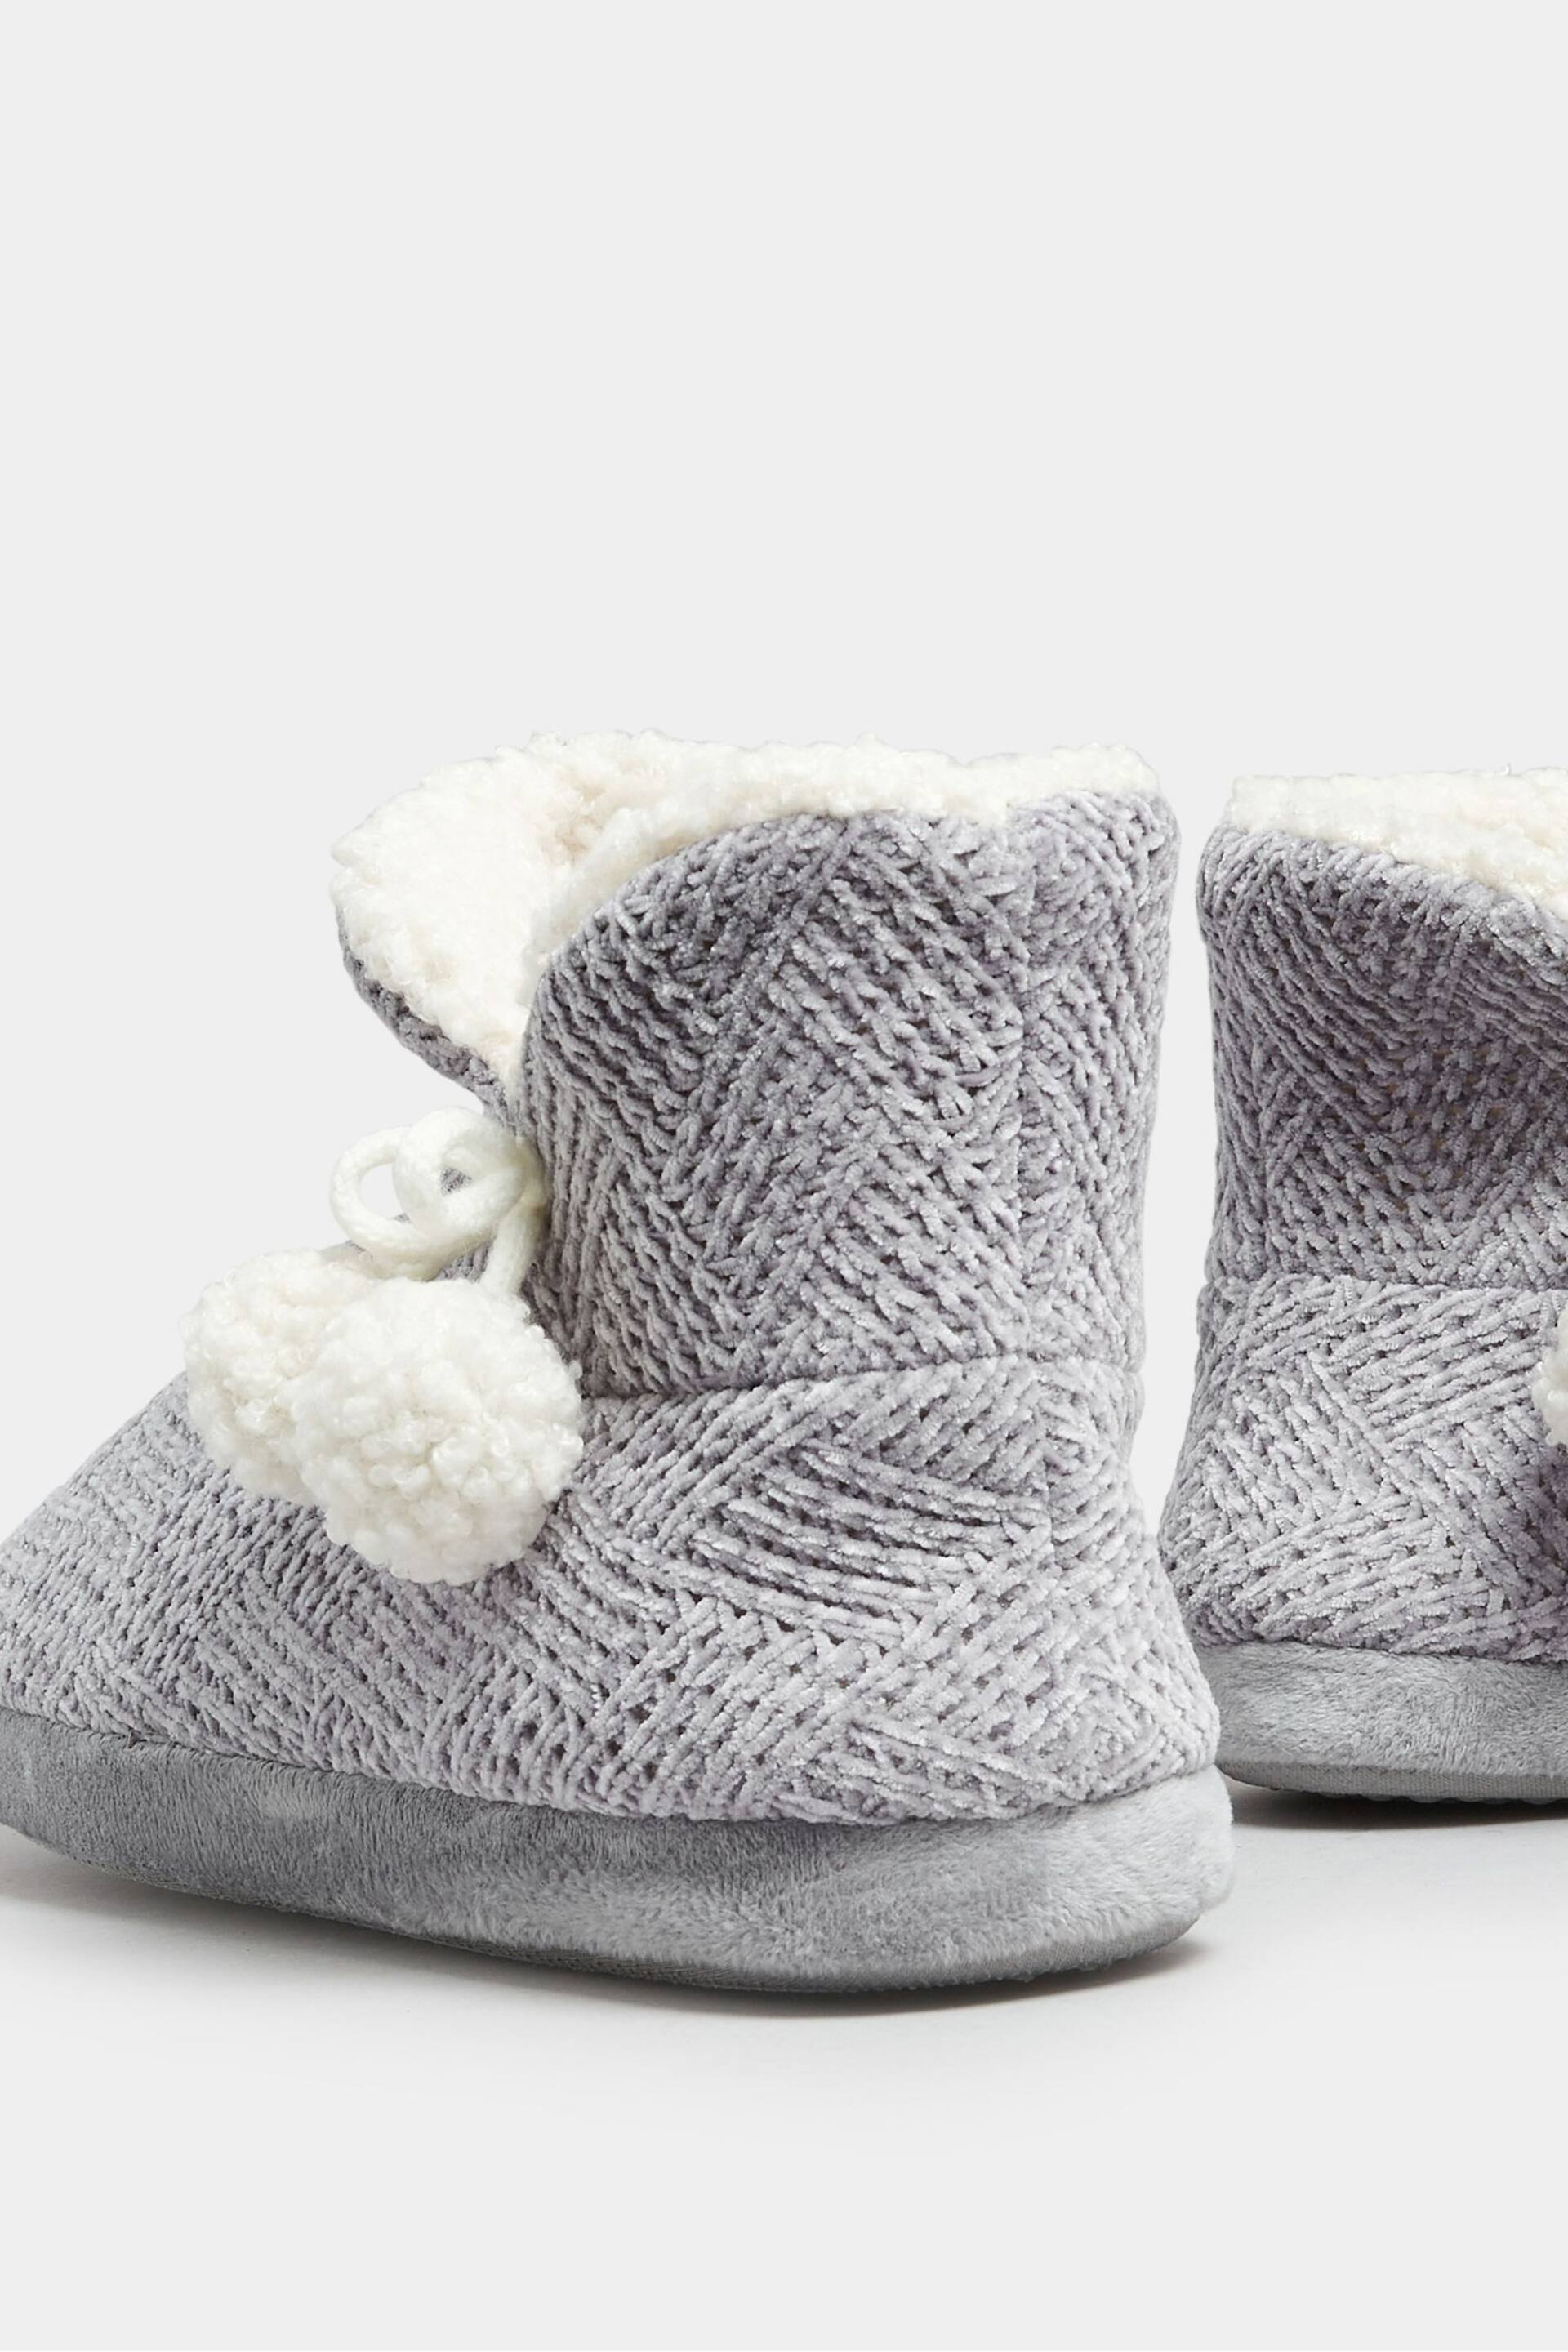 Yours Curve Grey Wide Fit Fluffy Chevron Boots Slippers - Image 3 of 5